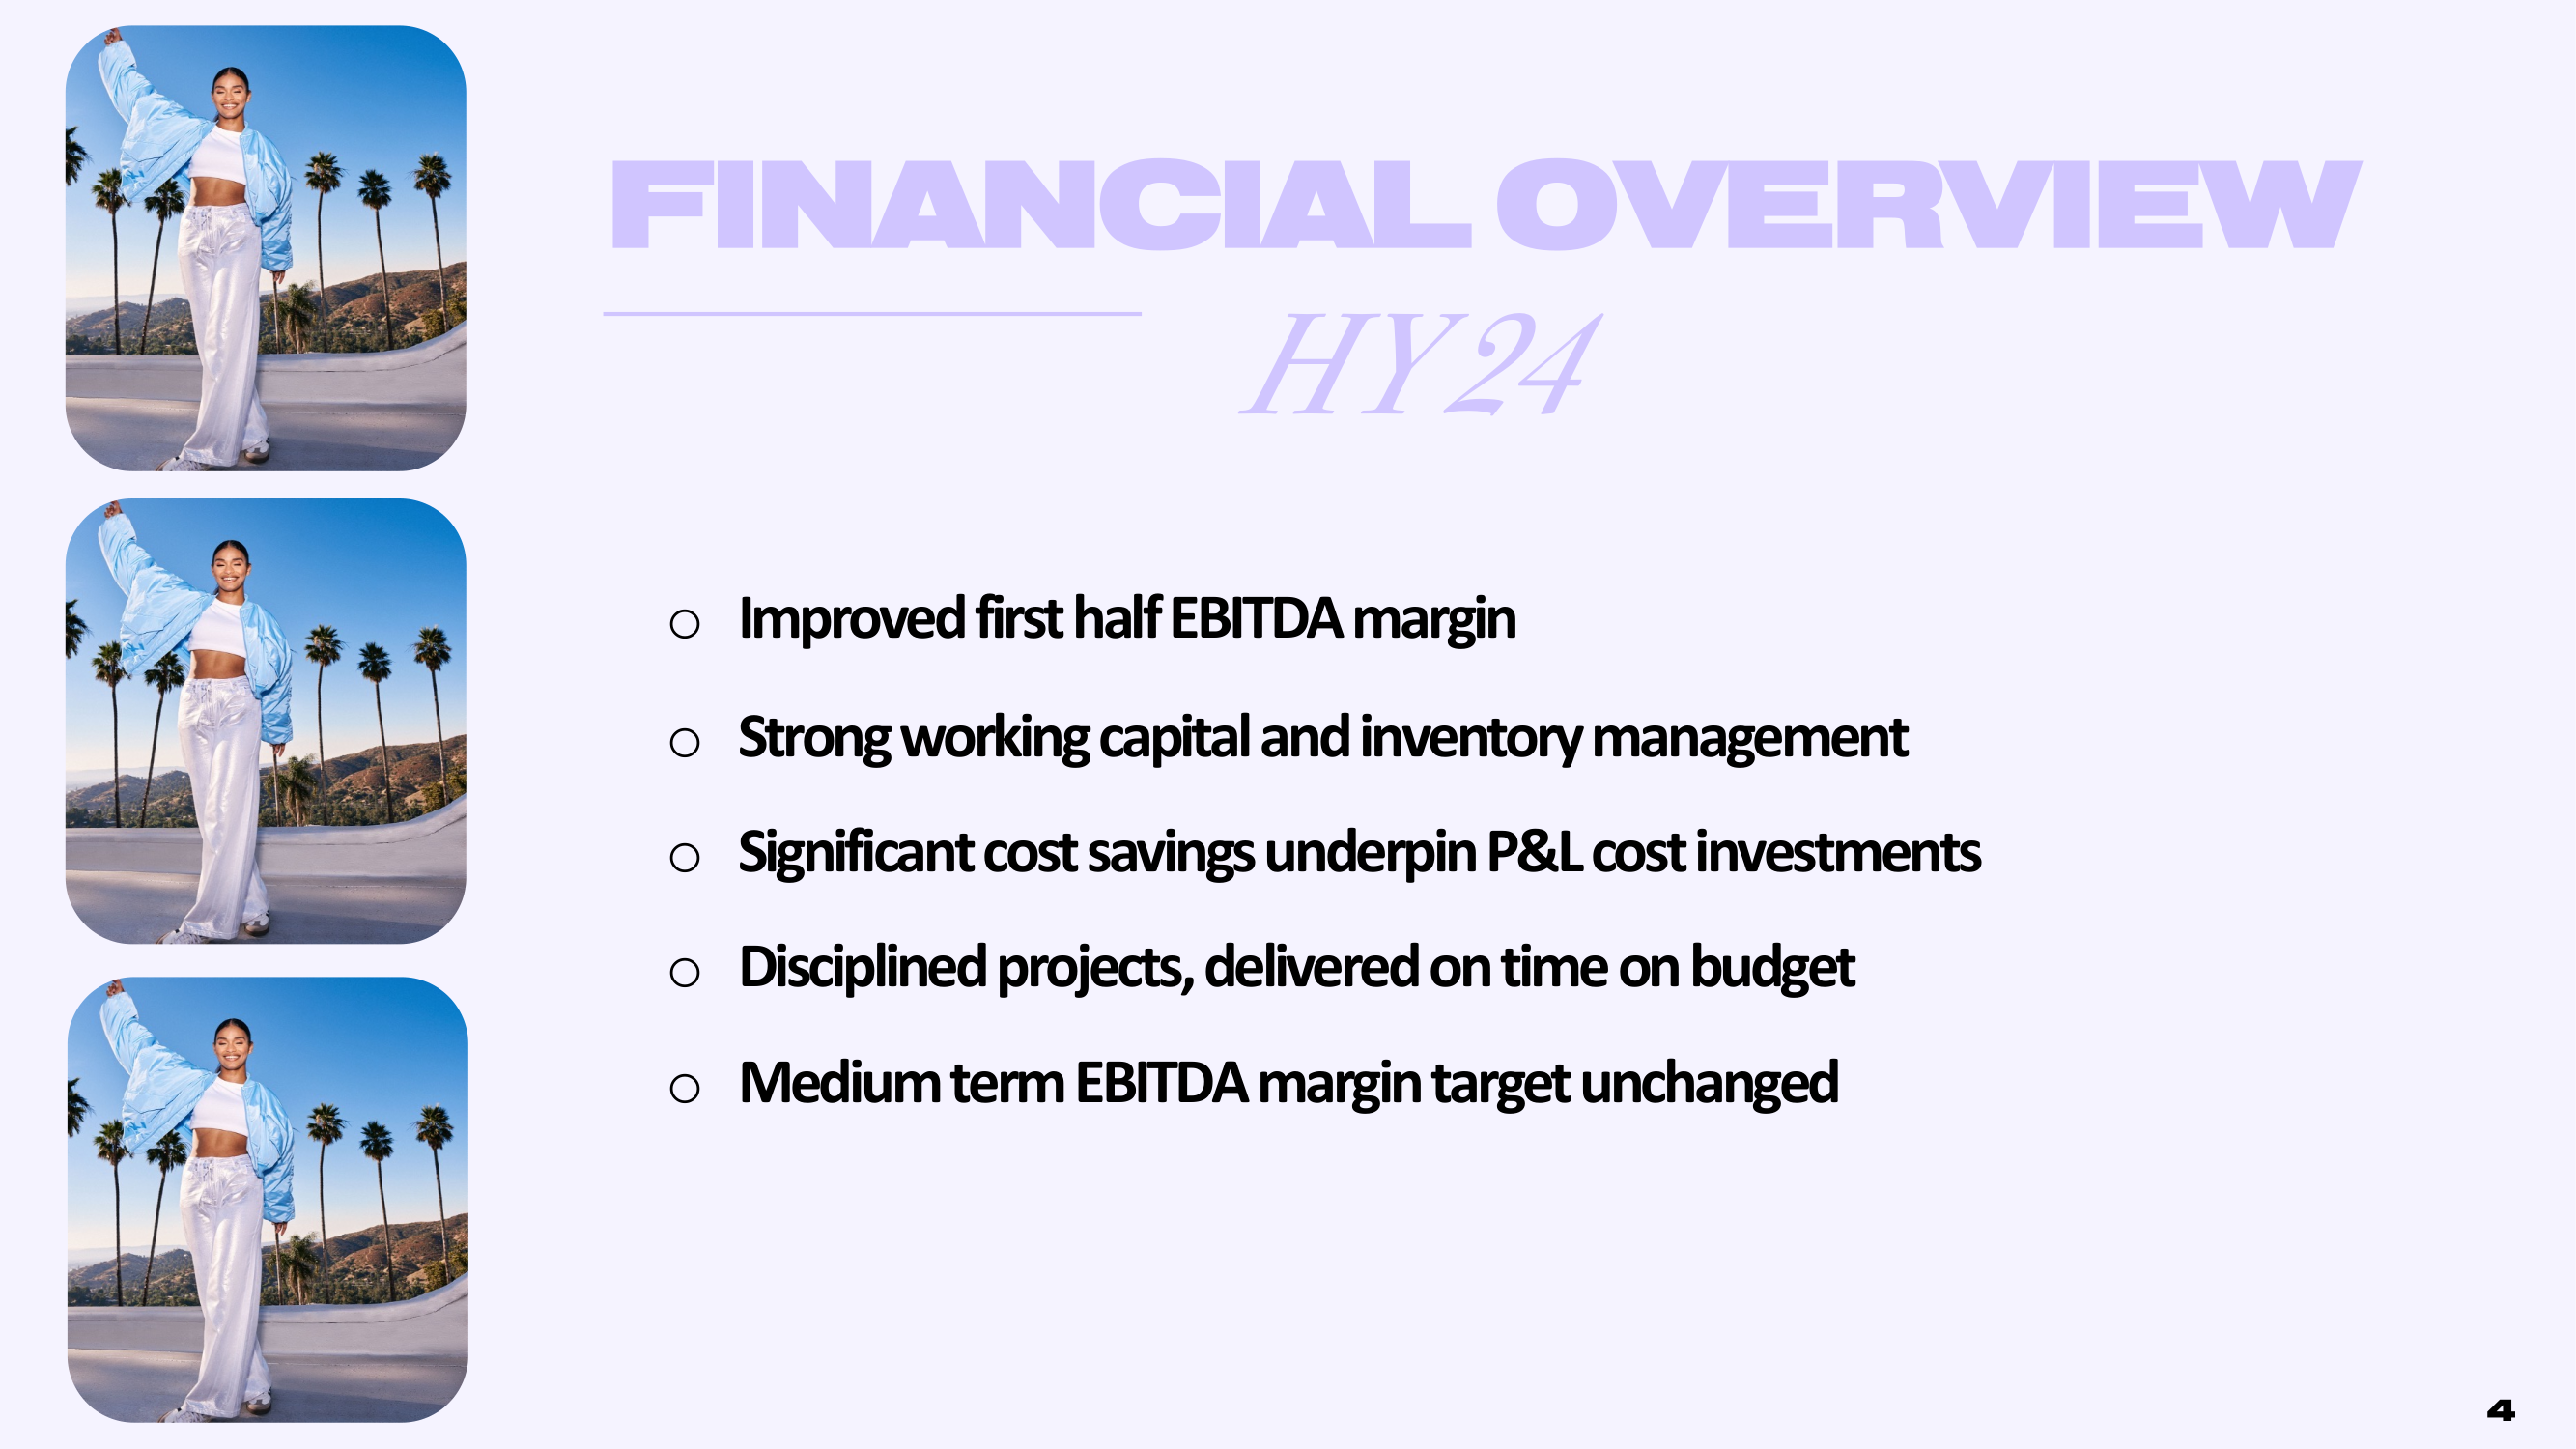 FINANCIAL OVERVIEW 
